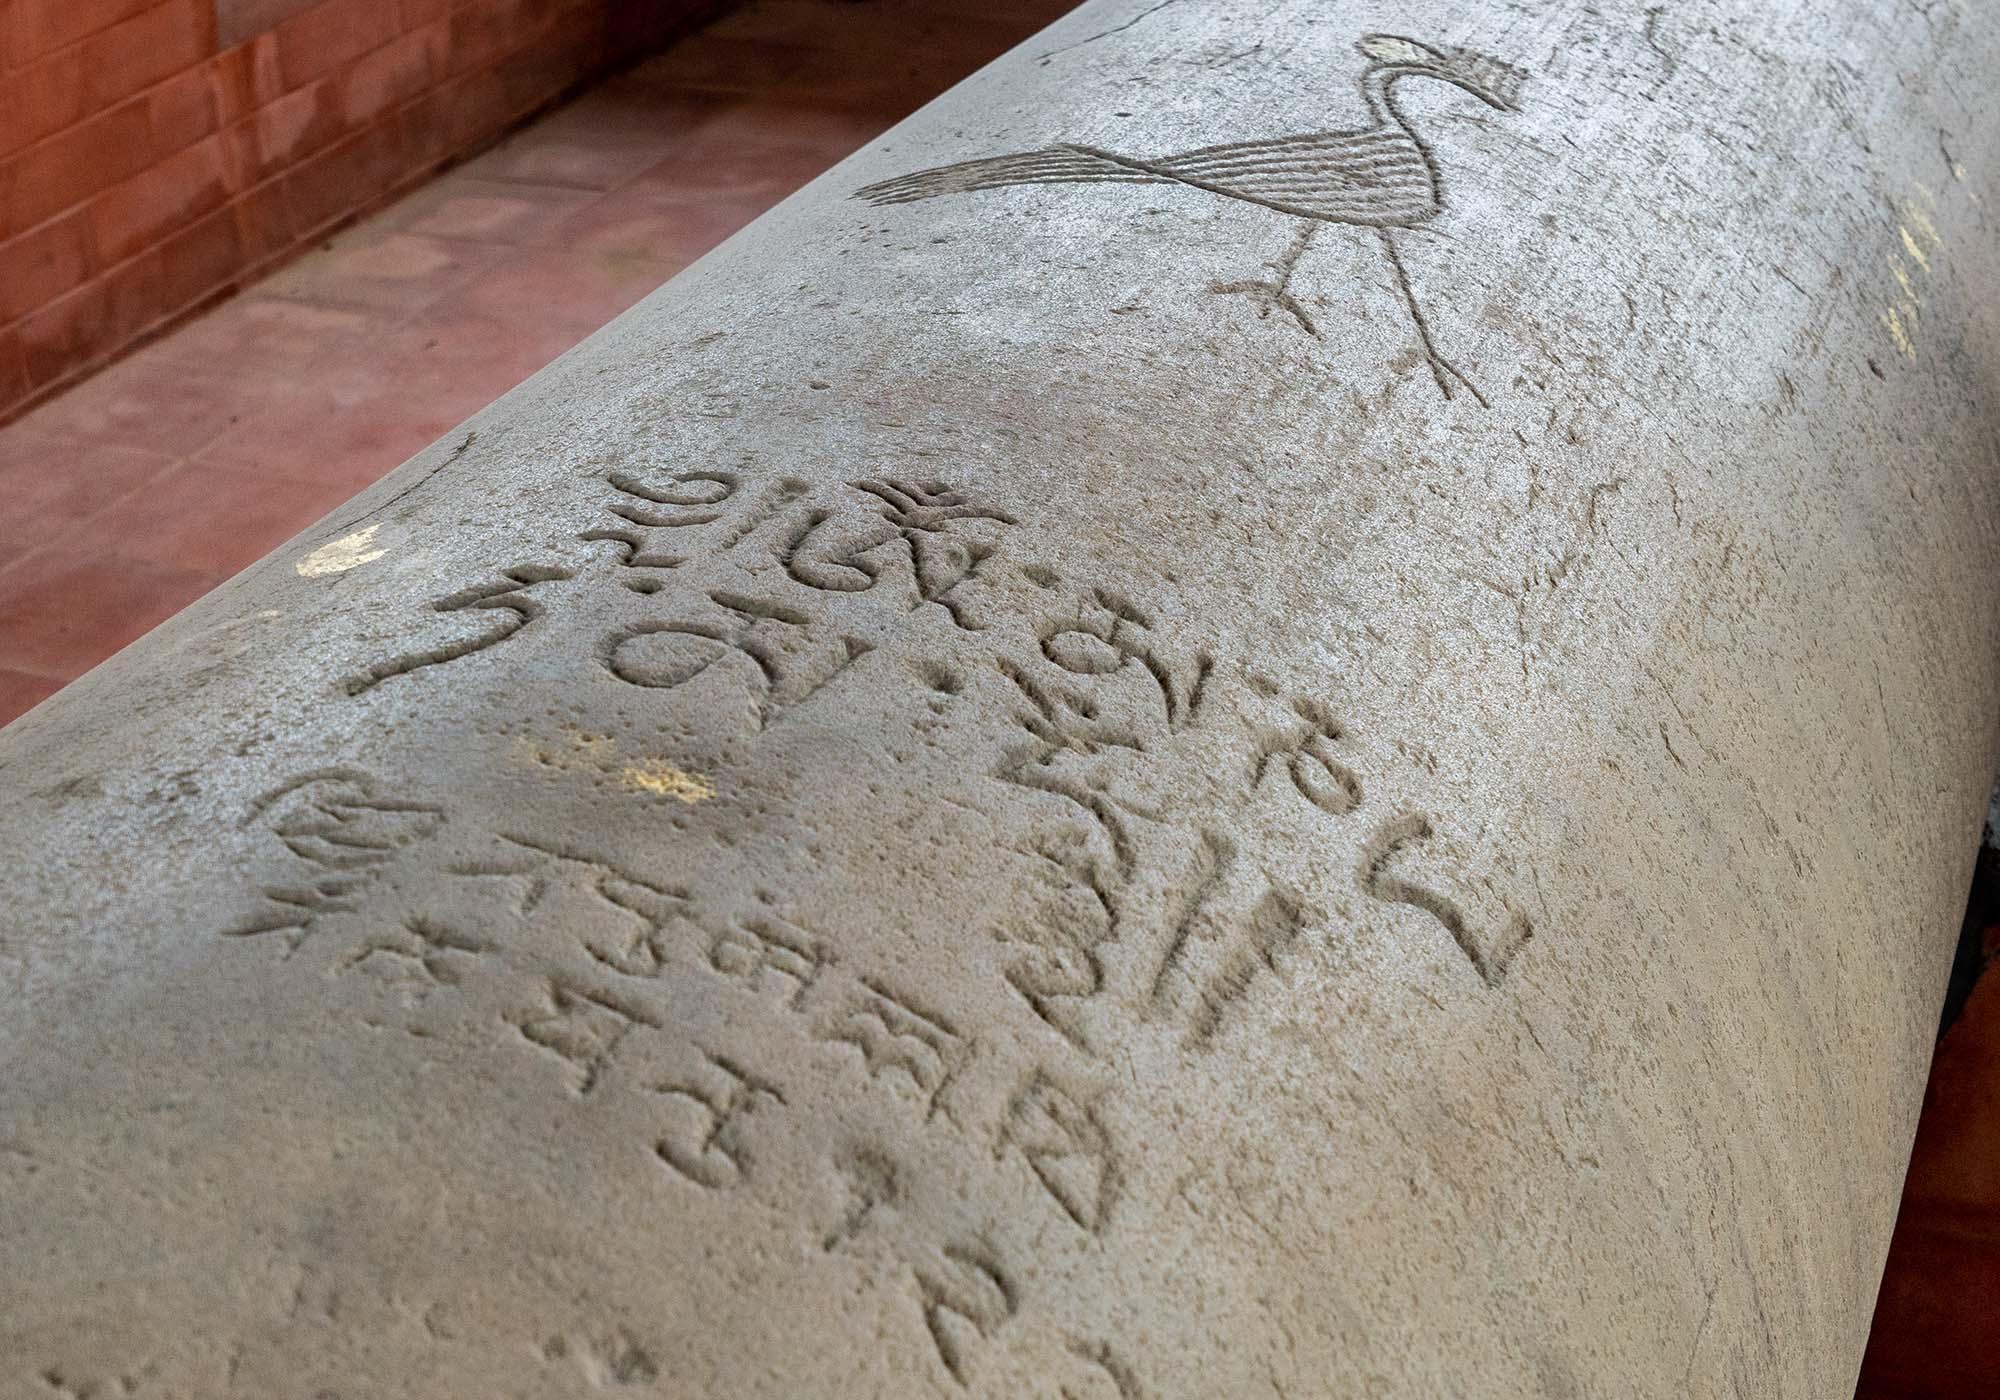 The pillar at Niglihawa was erected in 249 BC by Emperor Asoka to mark his visit here. The text is in Brahmi script and Pali language. – © Michael Turtle